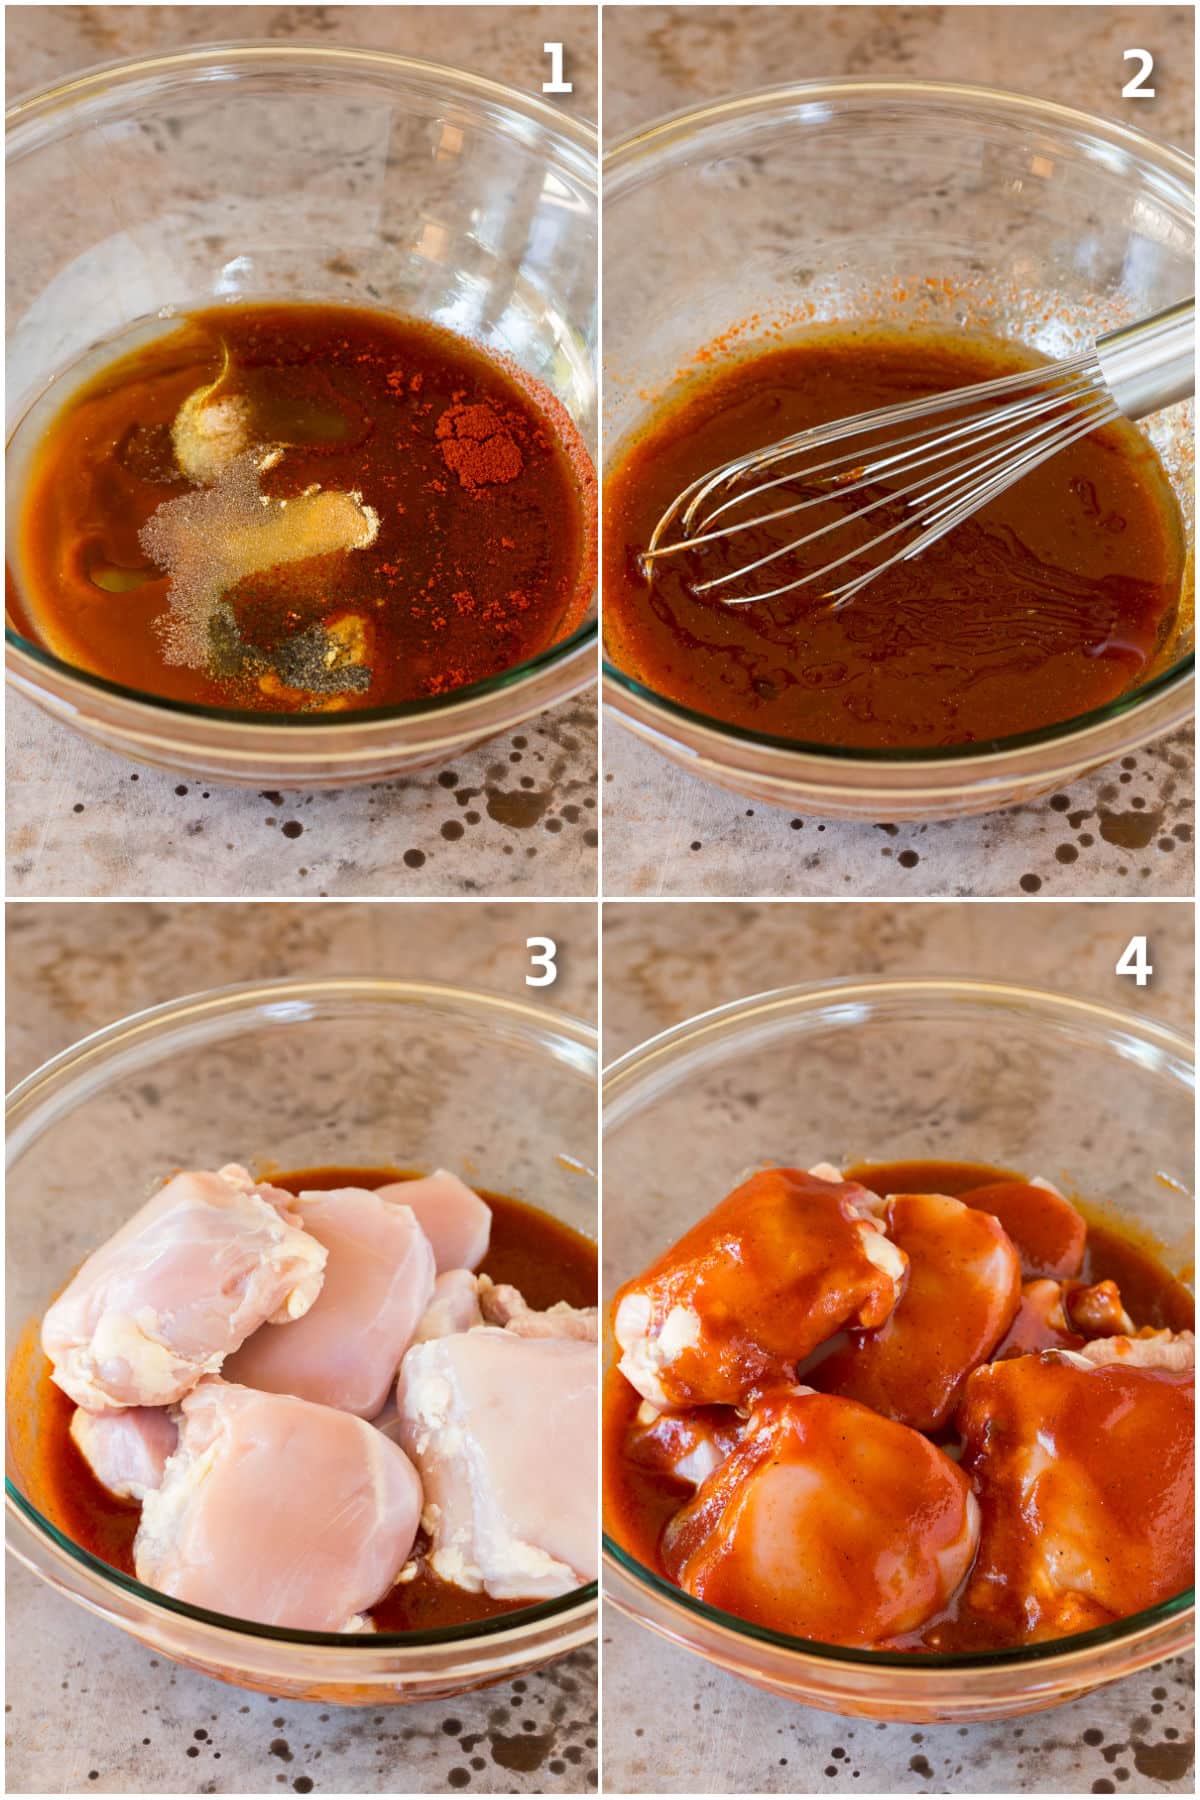 Step by step process shots showing how to make BBQ chicken marinade.